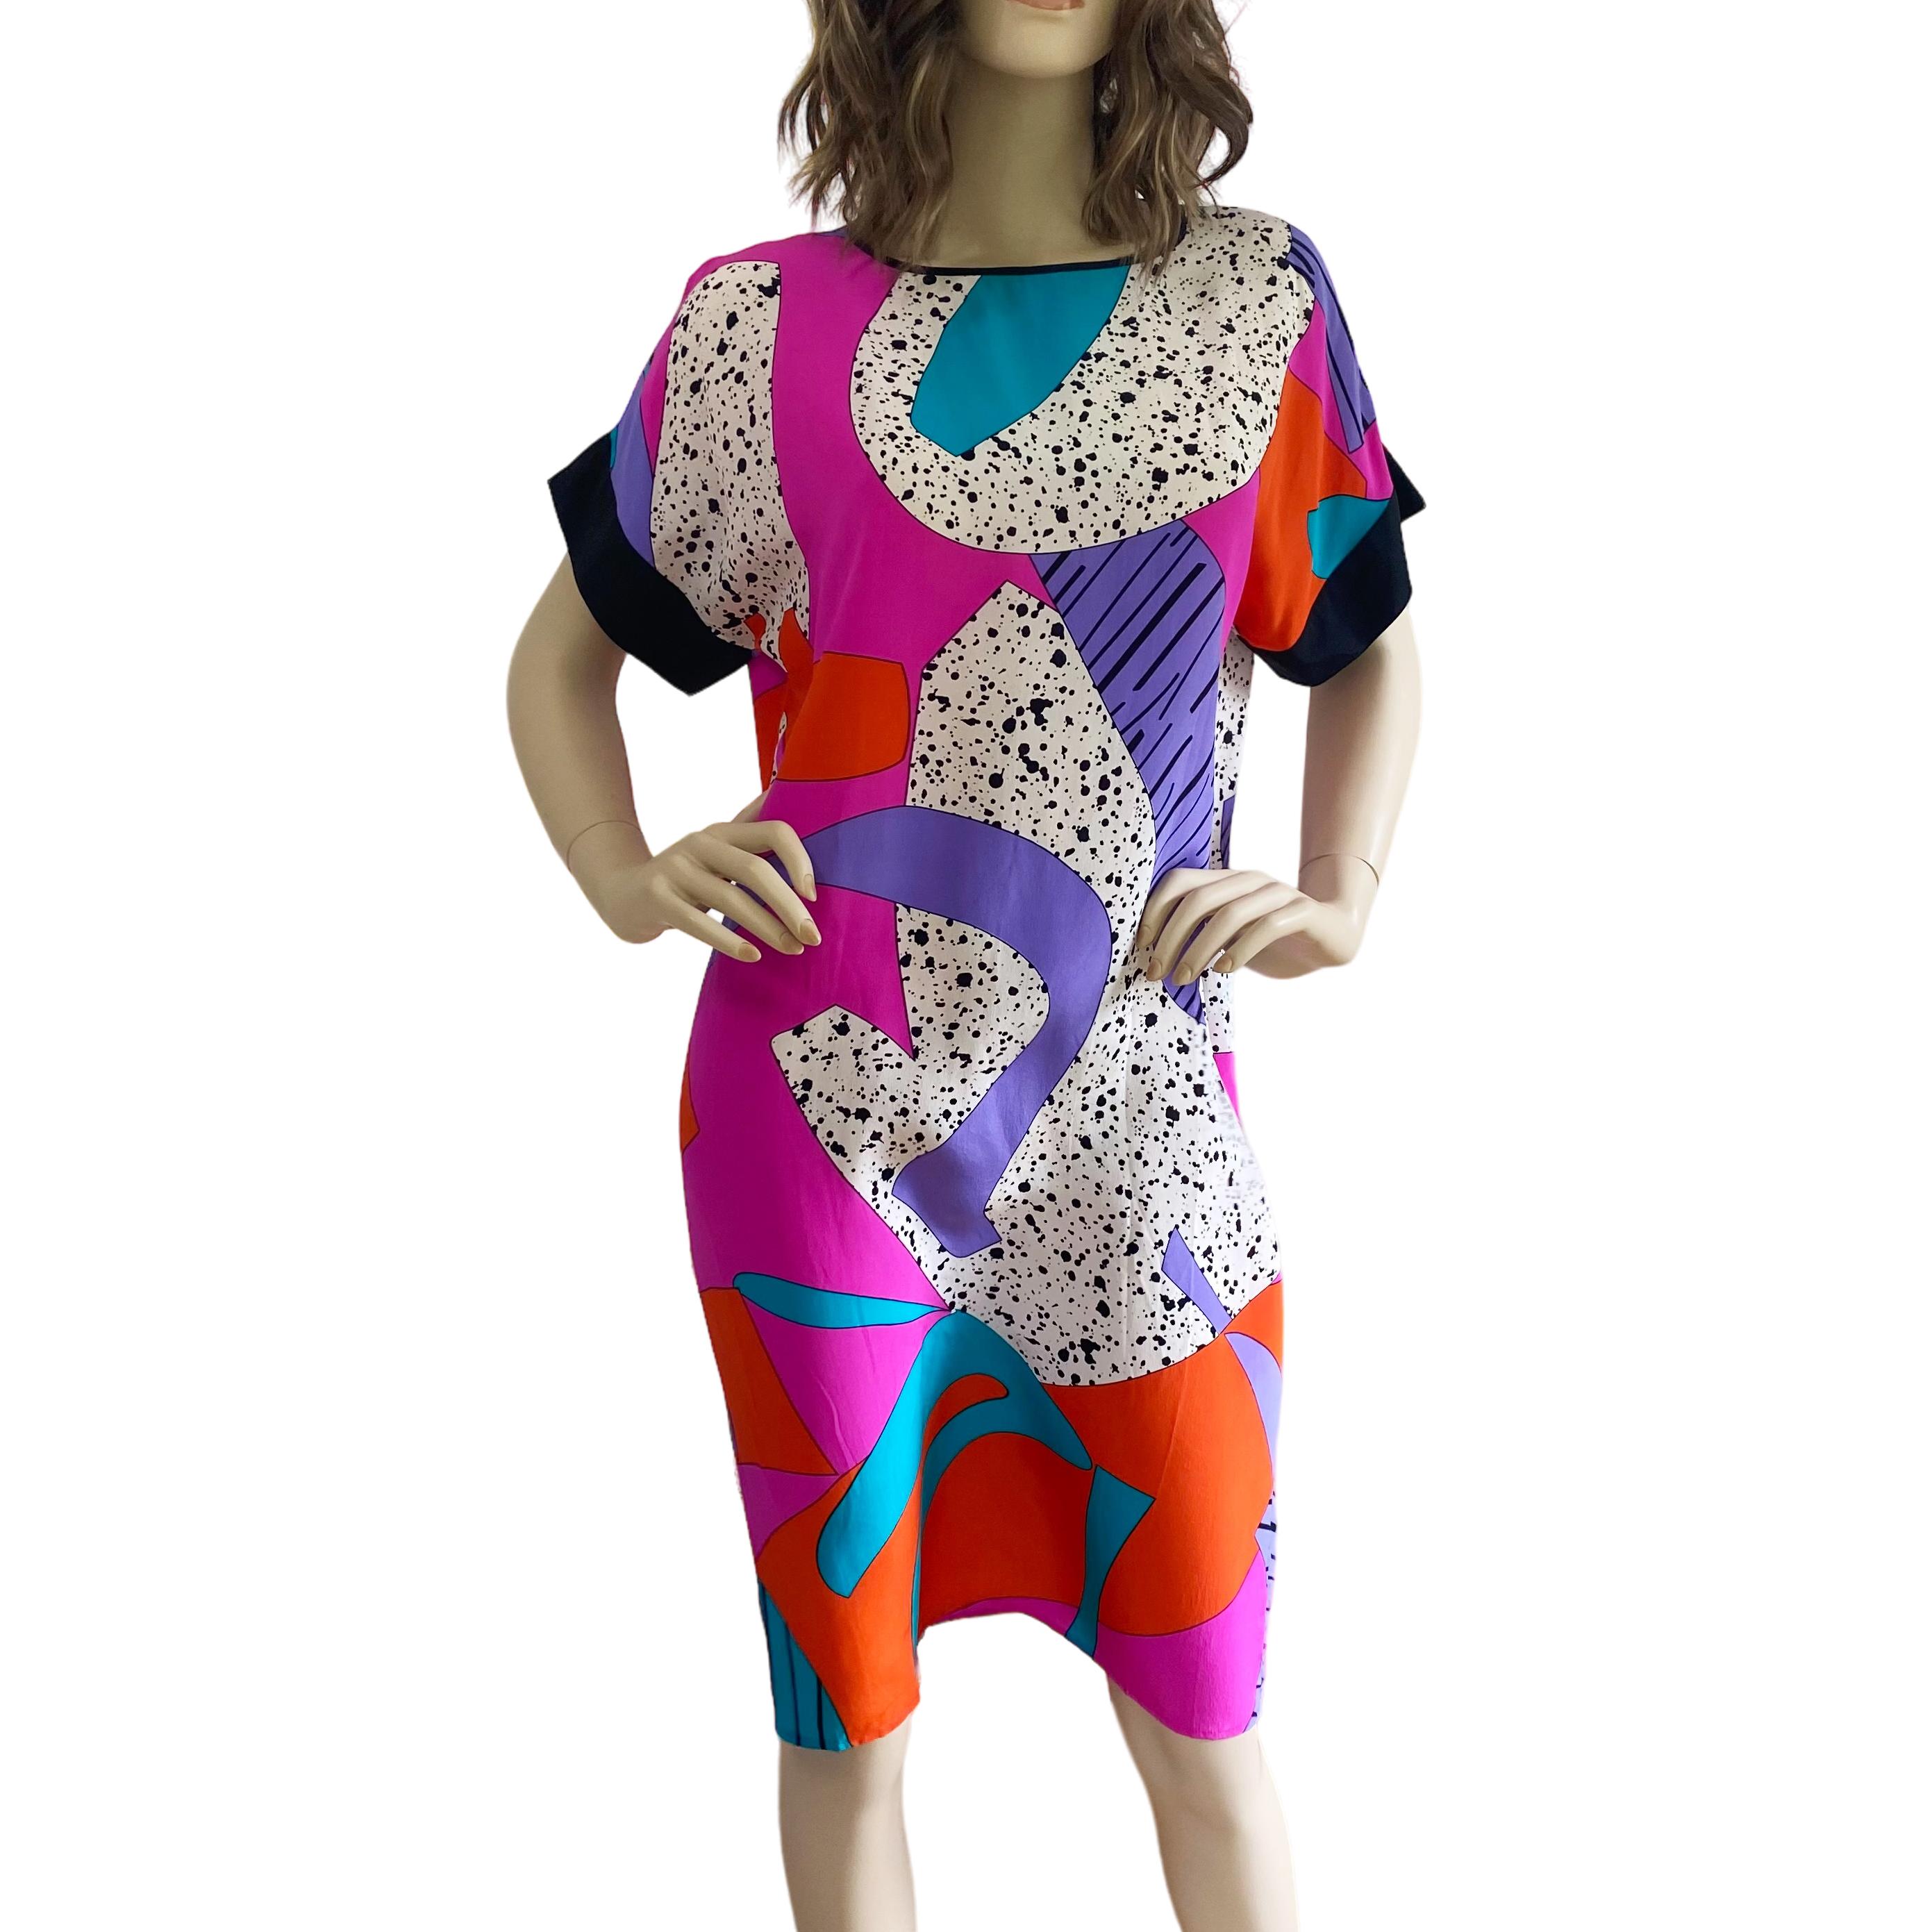 Women's Colorful Silk Tee Dress in Modern Art Print - Flora Kung design library NWT For Sale